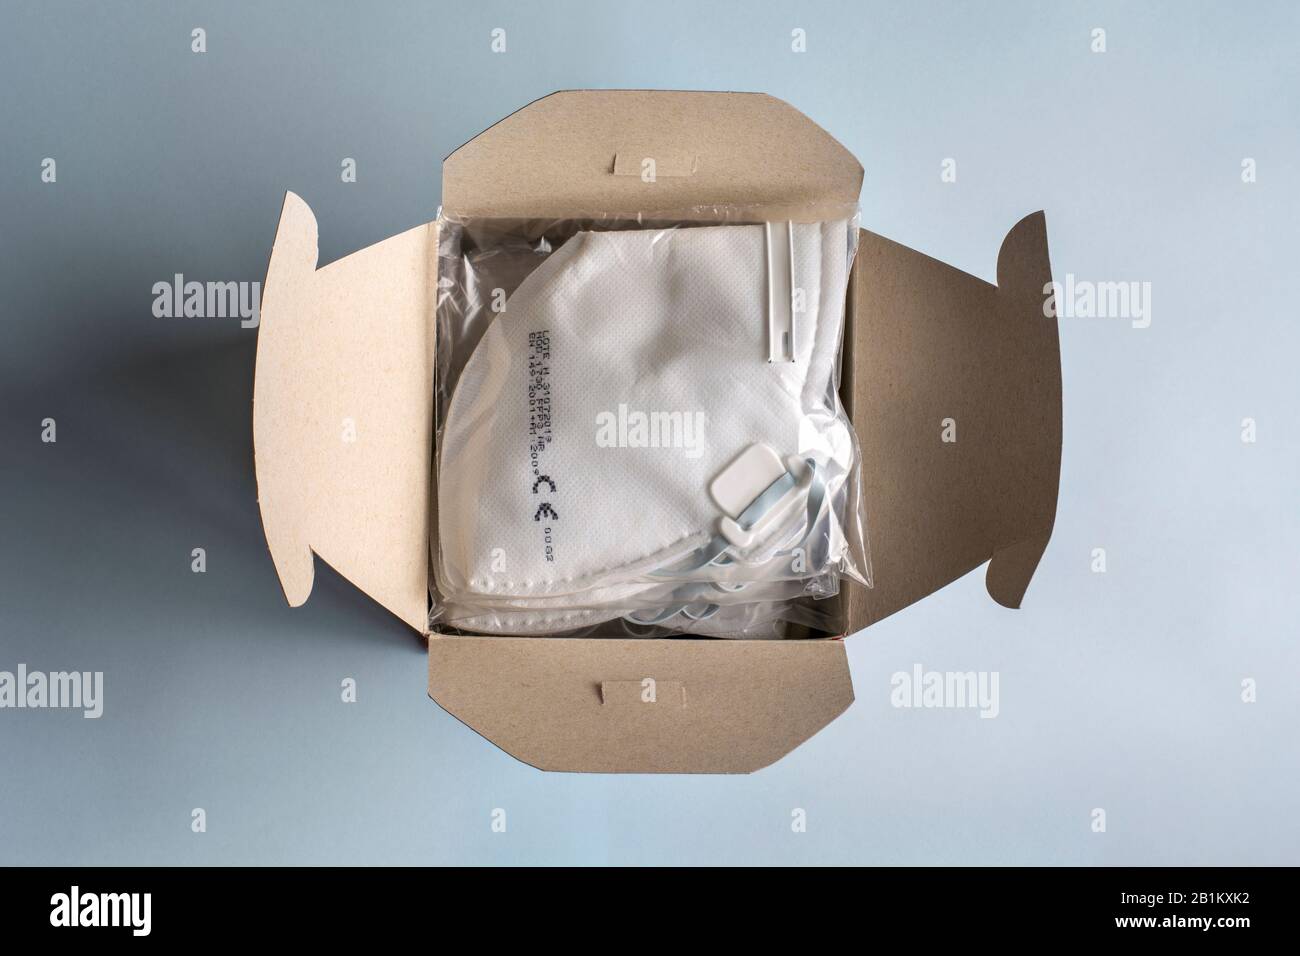 Filtering face mask. Box full of medical dust masks, disposable FFP3 respirators and with filter. Coronavirus, infectious diseases and precautions. Stock Photo